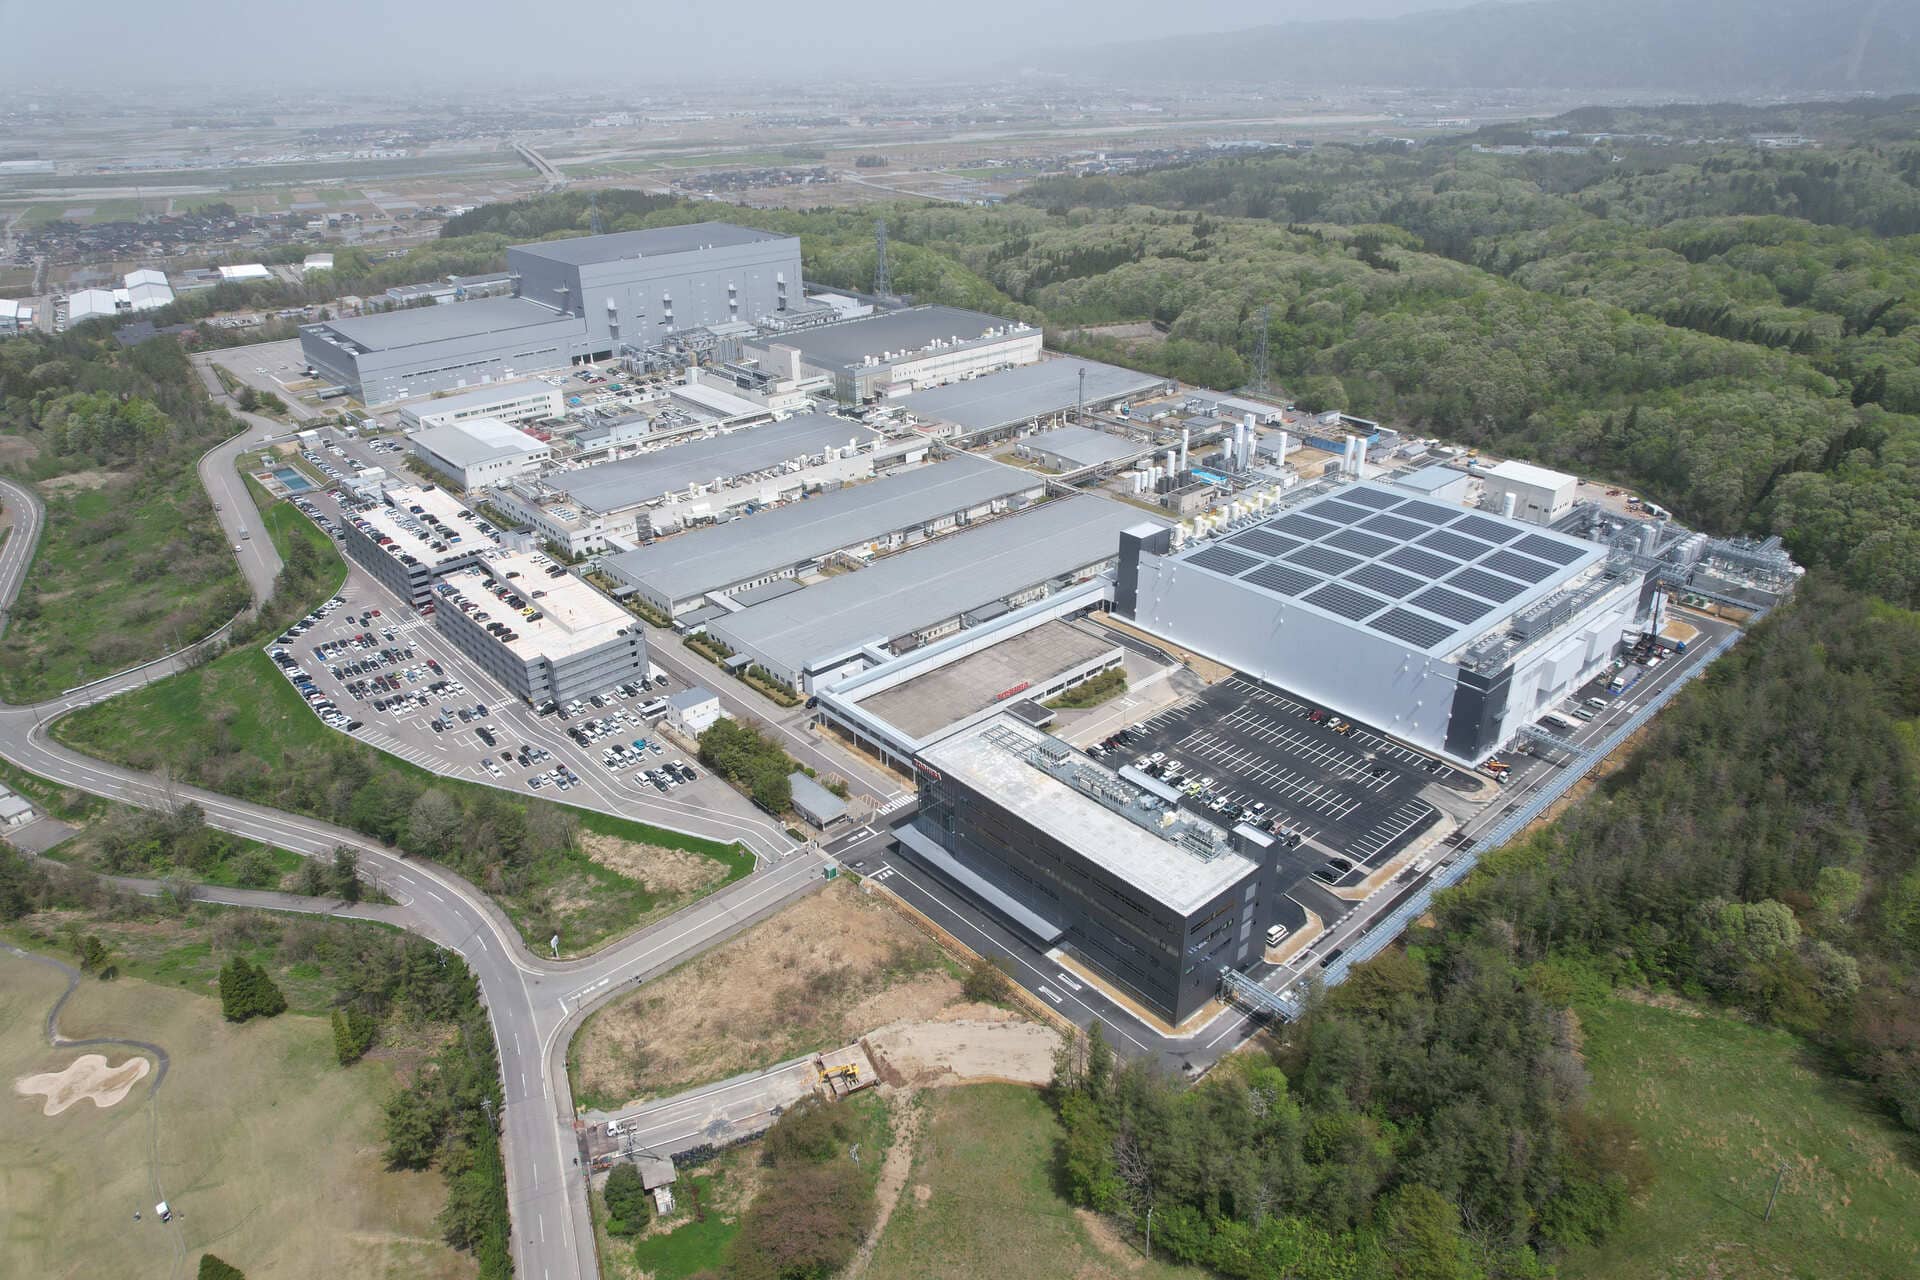 Toshiba completes new 300-millimeter wafer fab facility for power semiconductors.